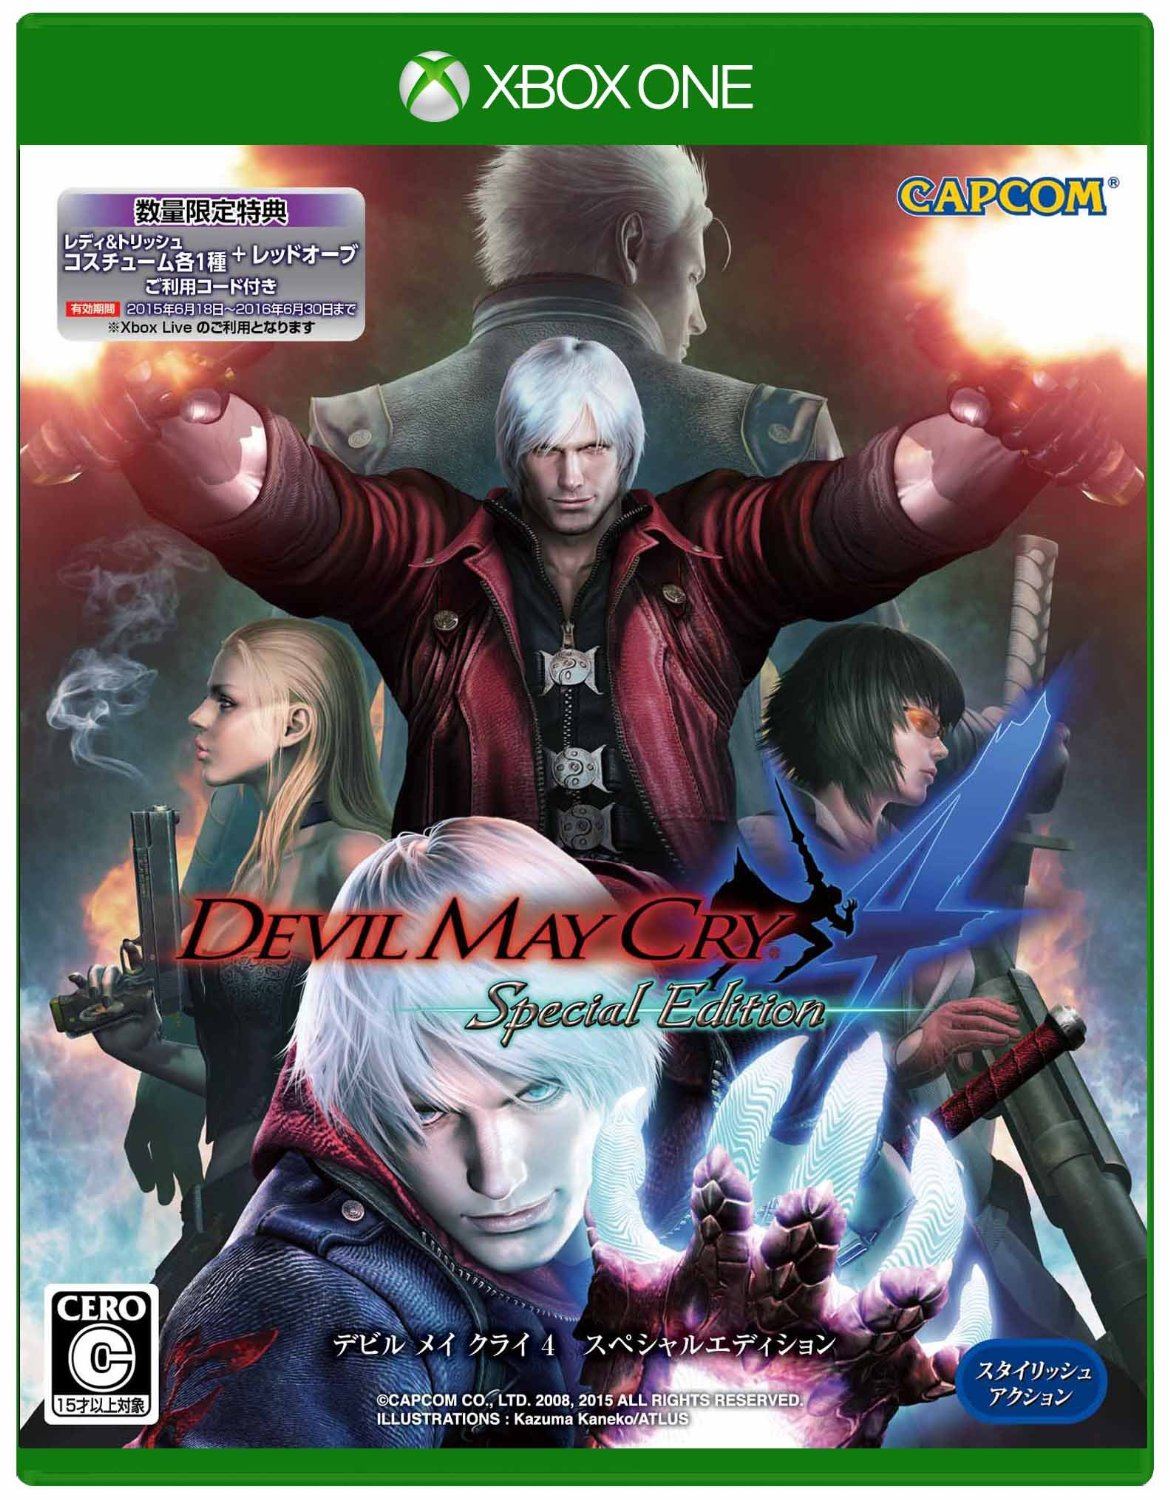 Devil May Cry 4 Special Edition for Xbox One